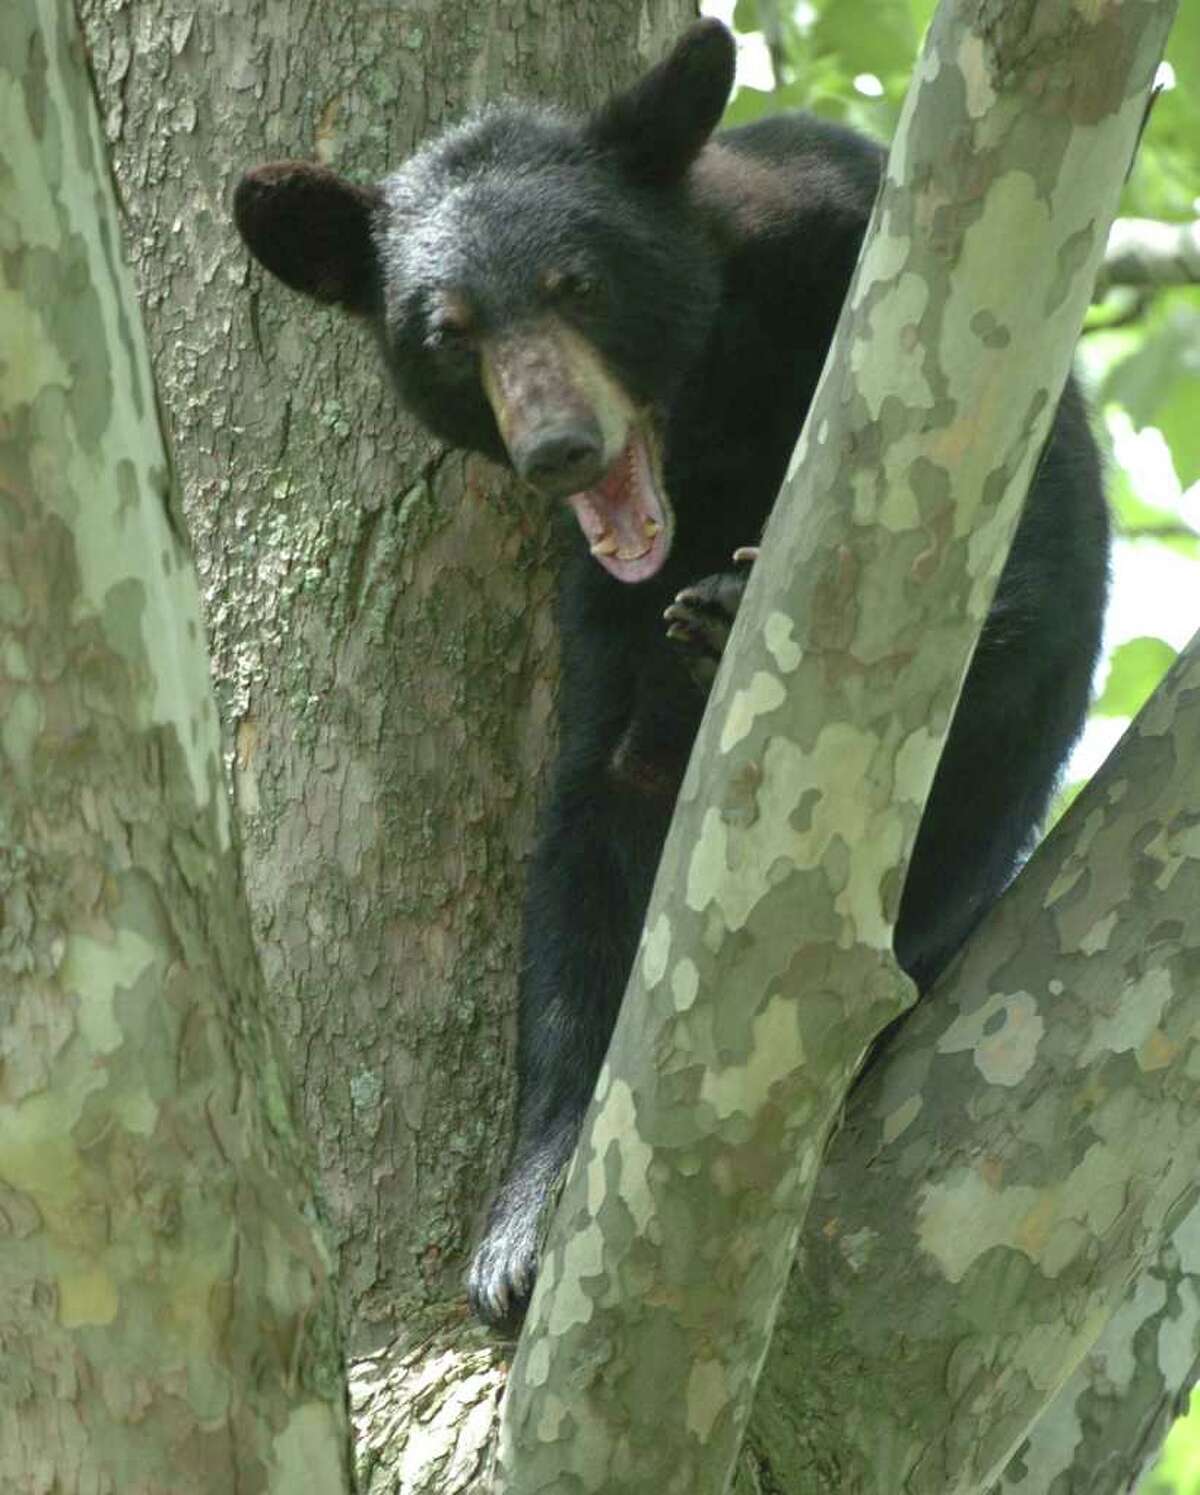 A young black bear sits in a tree in the rear of 33 John David Lane in Albany, New York May 27, 2004. He climbed the tree to avoid the humans that awaited him on the ground below the tree. ENCON officers were called to tranquilize the bear and remove him from the tree. Here the bear yawns at the humans below. (Skip Dickstein / Times Union Archive)